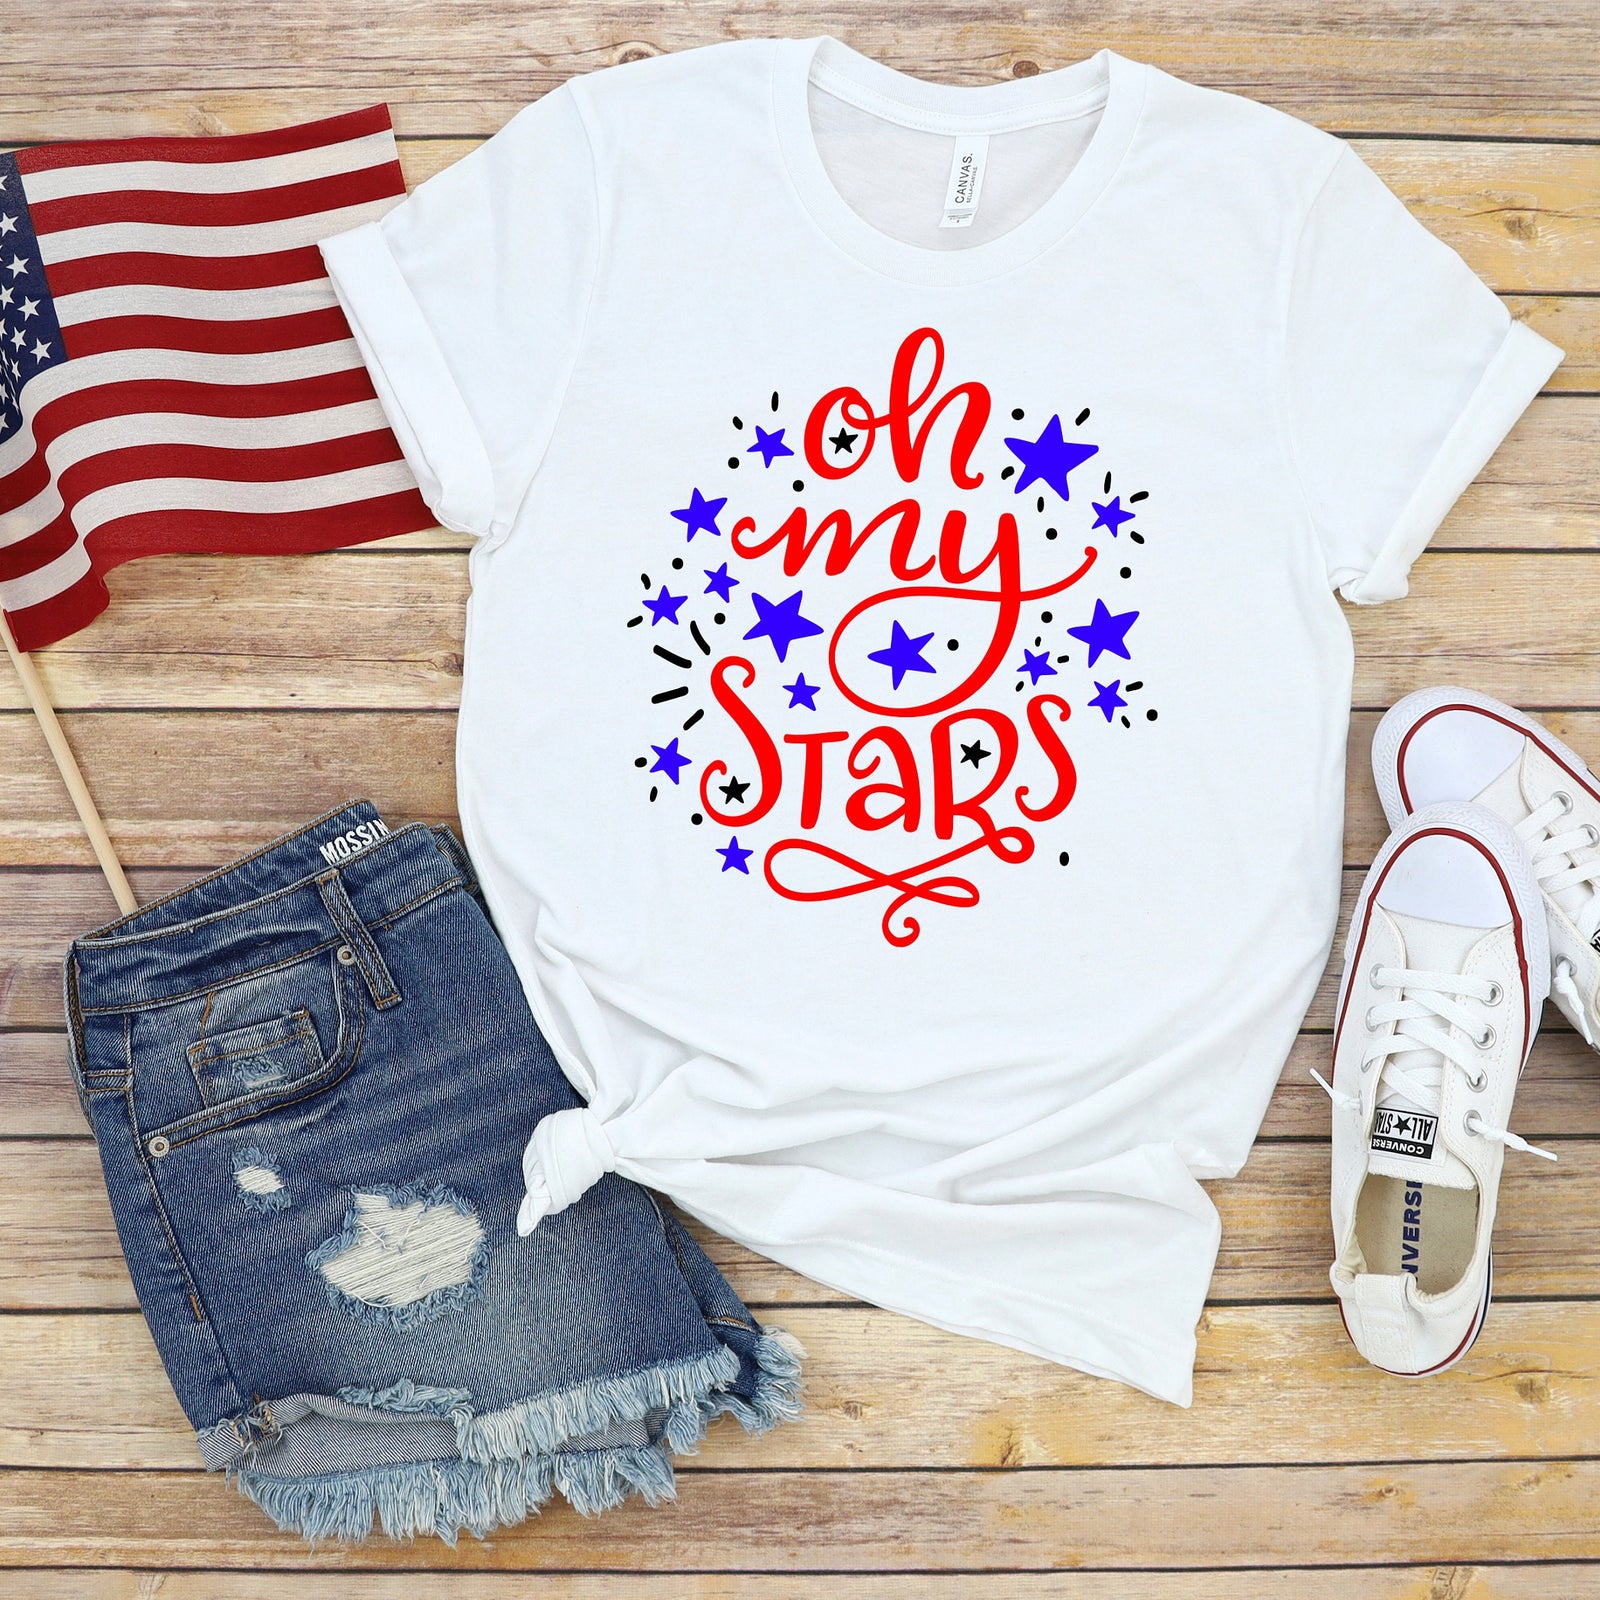 Oh My Stars Fourth of July Adult T Shirt - Independence Day - Memorial - Red White and Blue USA